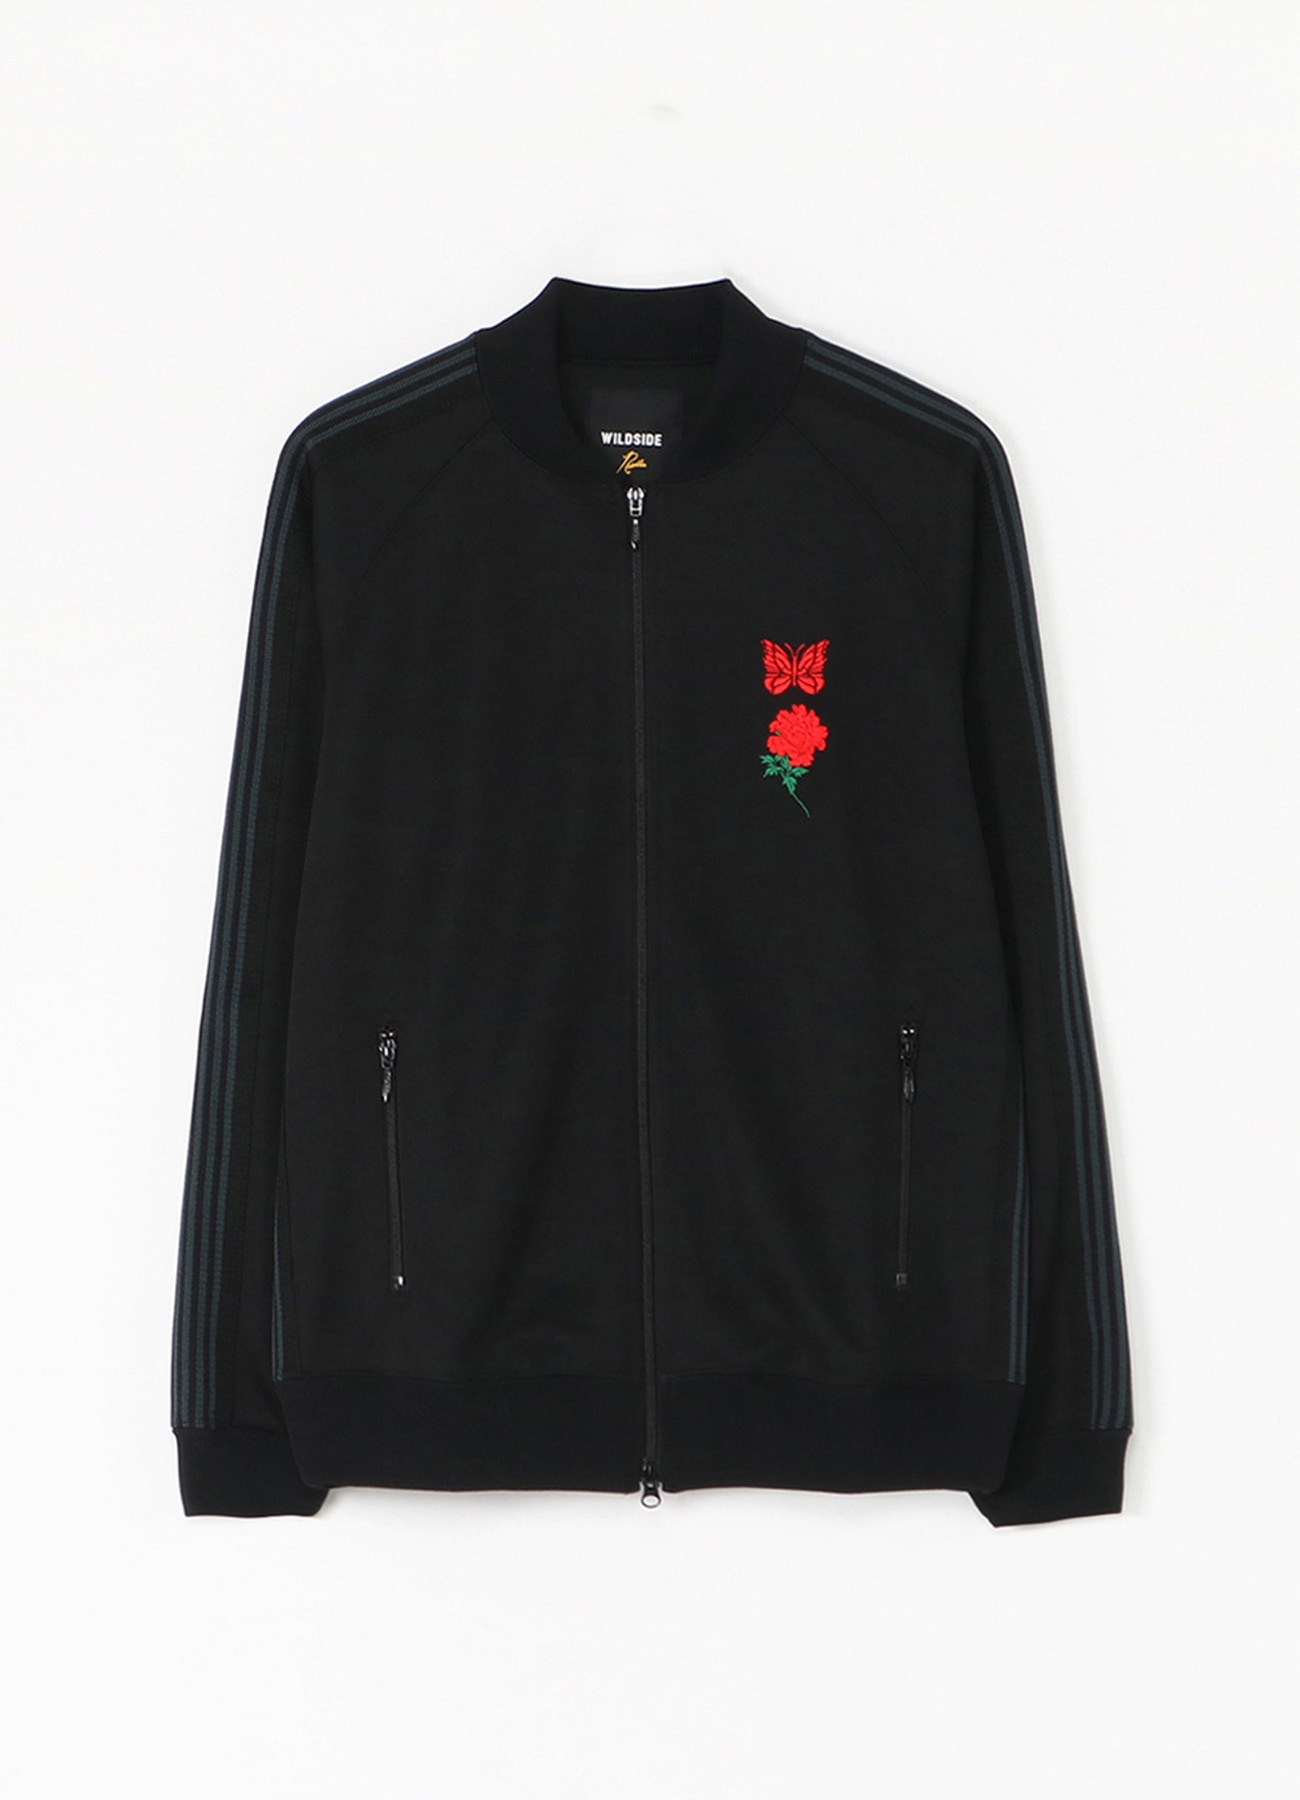 WILDSIDE × NEEDLES R.C. Track Jacket(L CHARCOALxBLACK): NEPENTHES